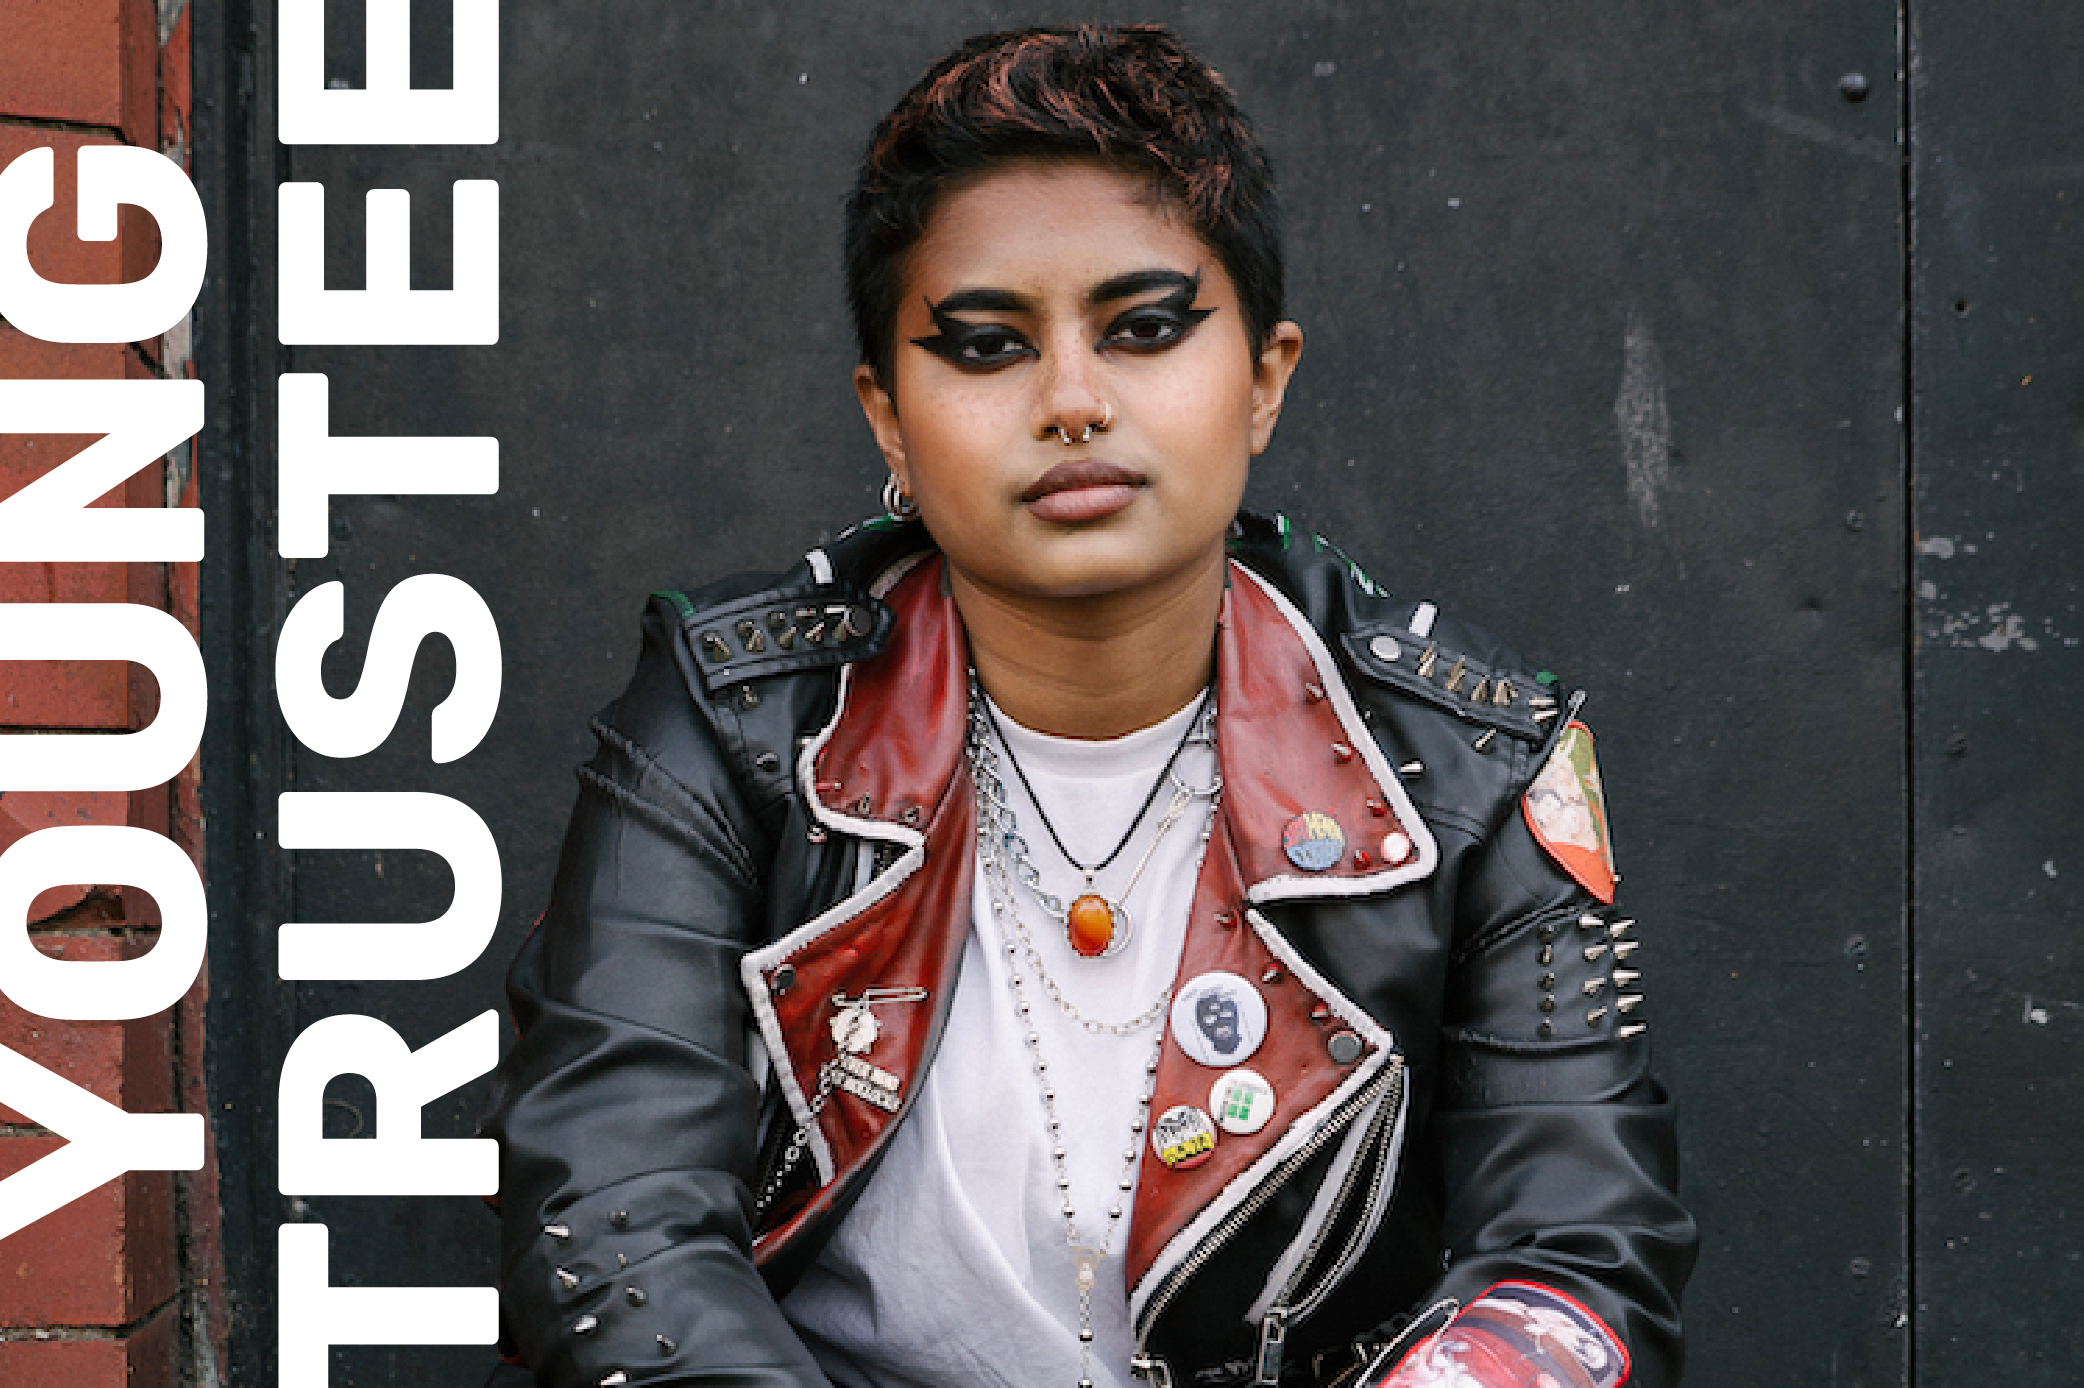 Jay Mitra, a South Asian nonbinary person, is sat on the steps outside looking directly at the camera. They have black hair and are wearing a white t-shirt, a studded black and red leather jacket, and black leather trousers. The photographer Jeanie Jean is credited on the bottom right of the photo.